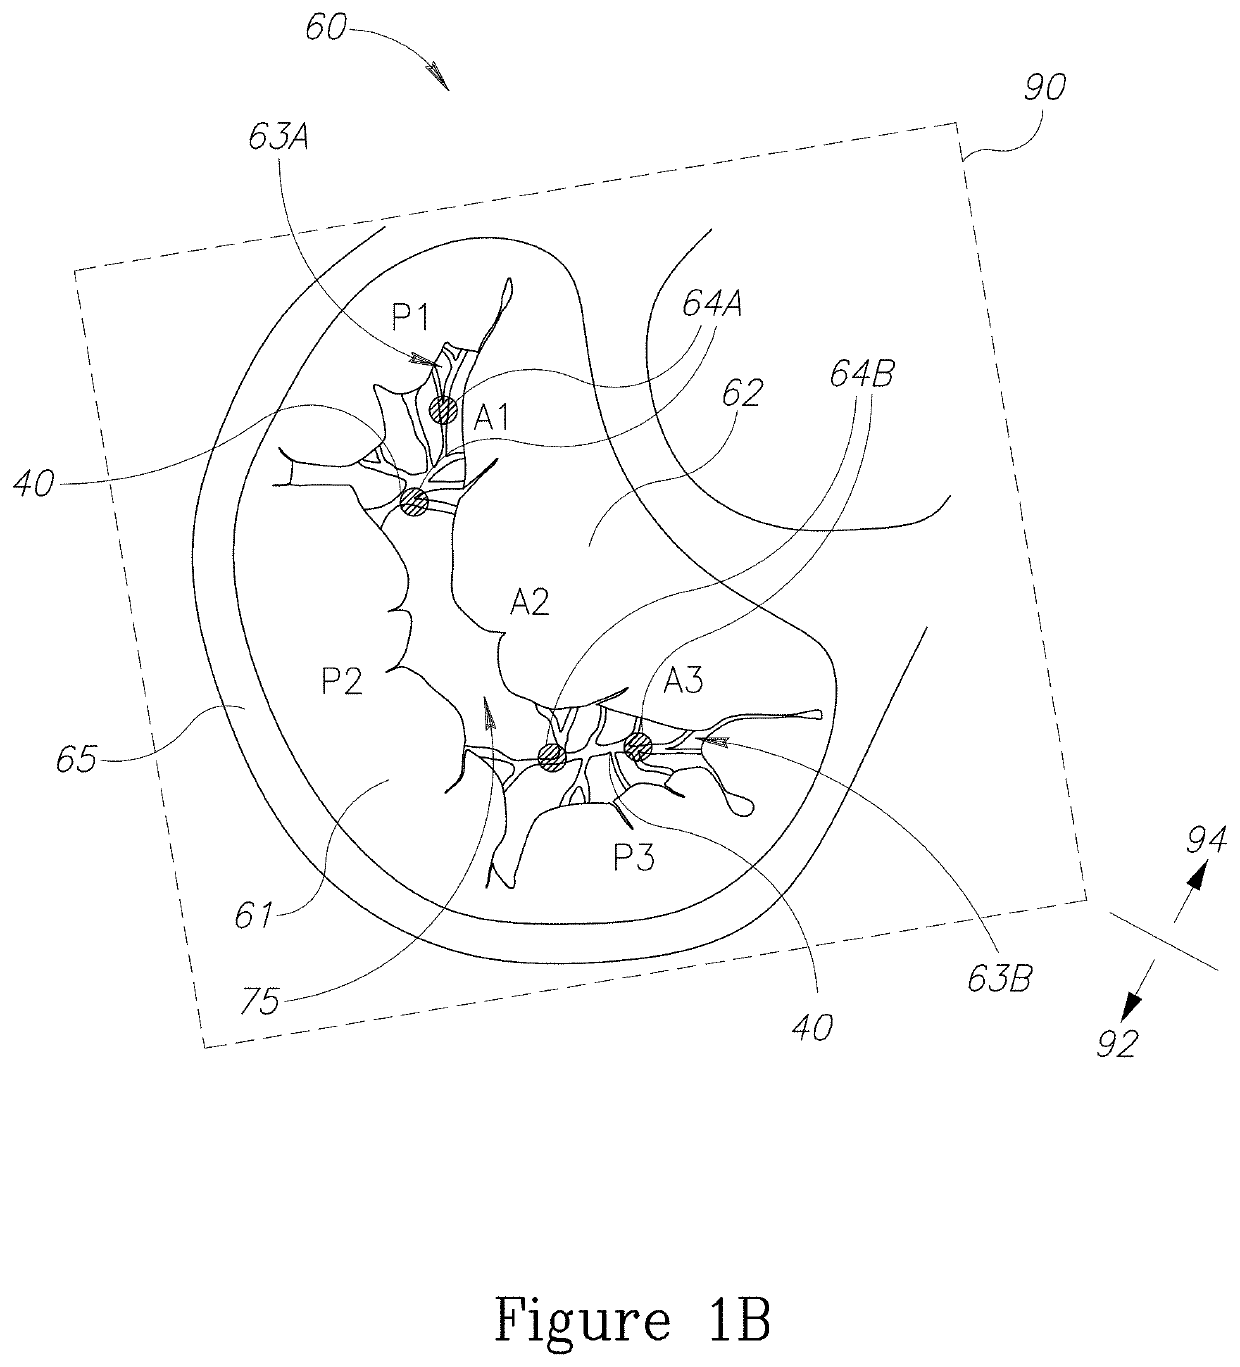 Devices and implantation methods for treating mitral valve condition